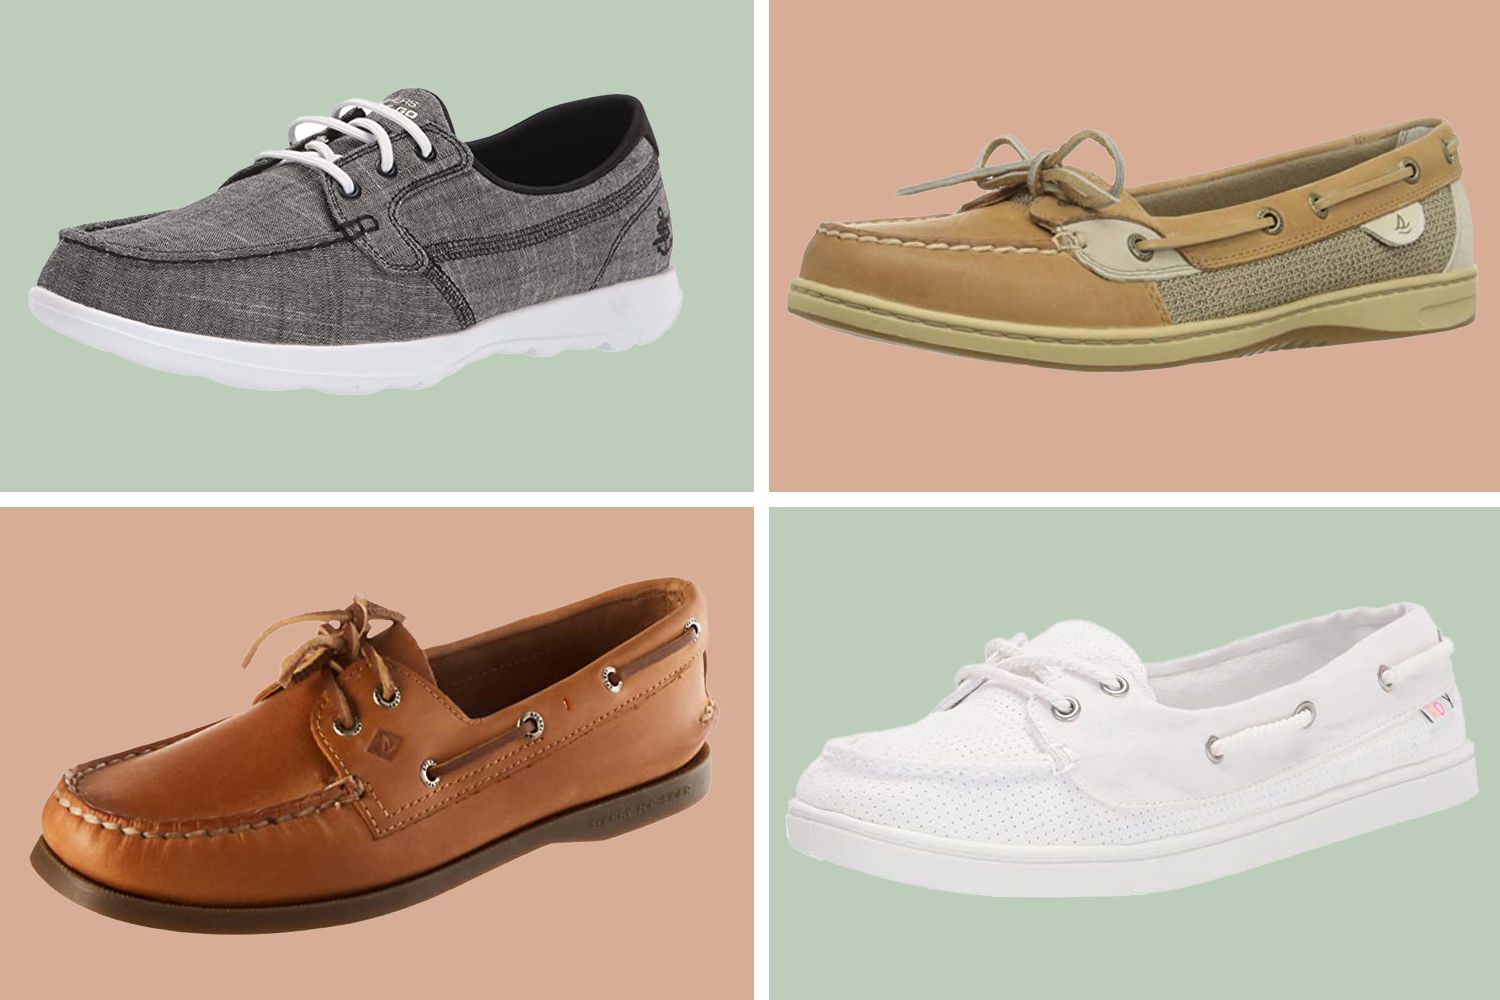 What Are The Different Styles Of Womens Boating Shoes?